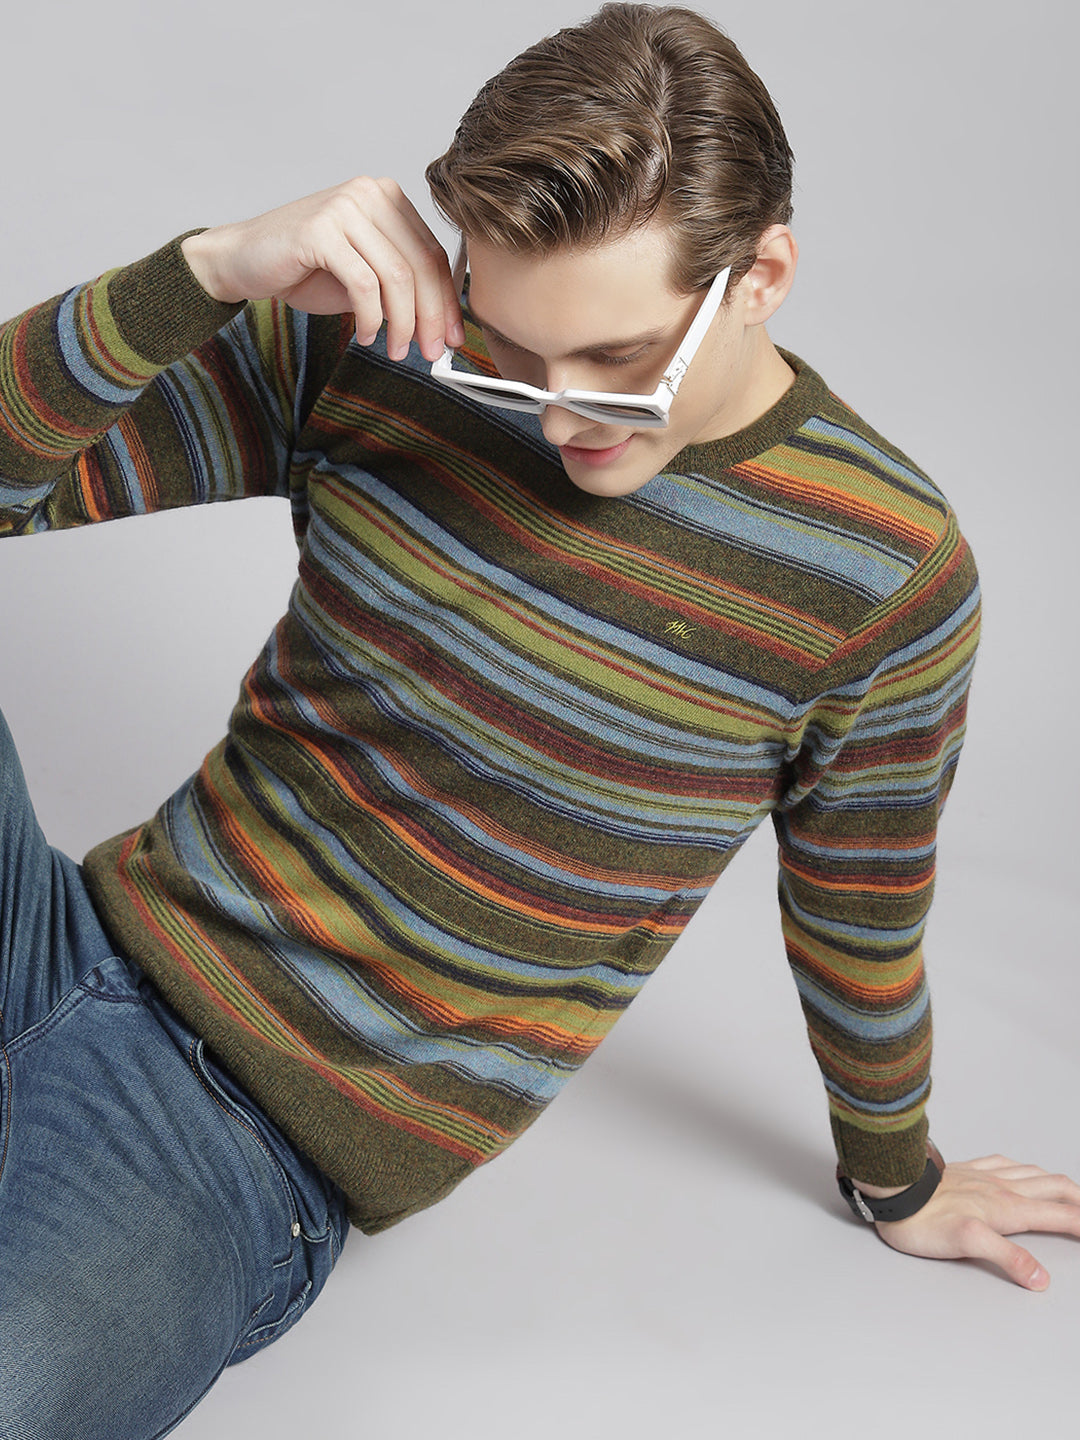 Men Olive Stripe Round Neck Full Sleeve Sweaters/Pullovers